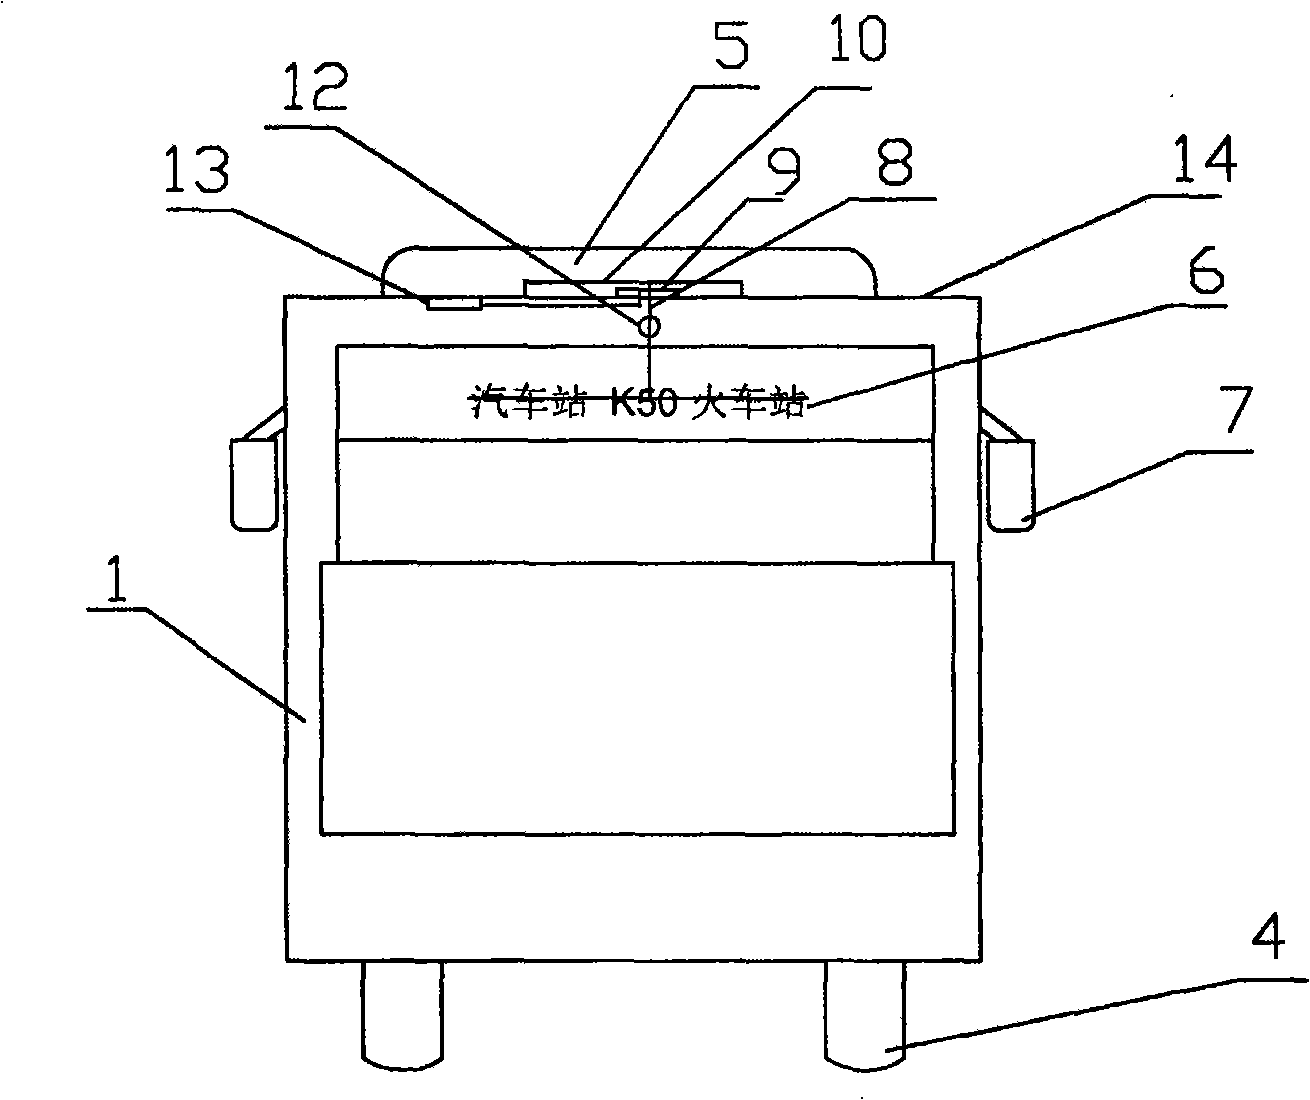 Lighting device of solar energy photovoltaic power generation system mounted on public transport vehicle